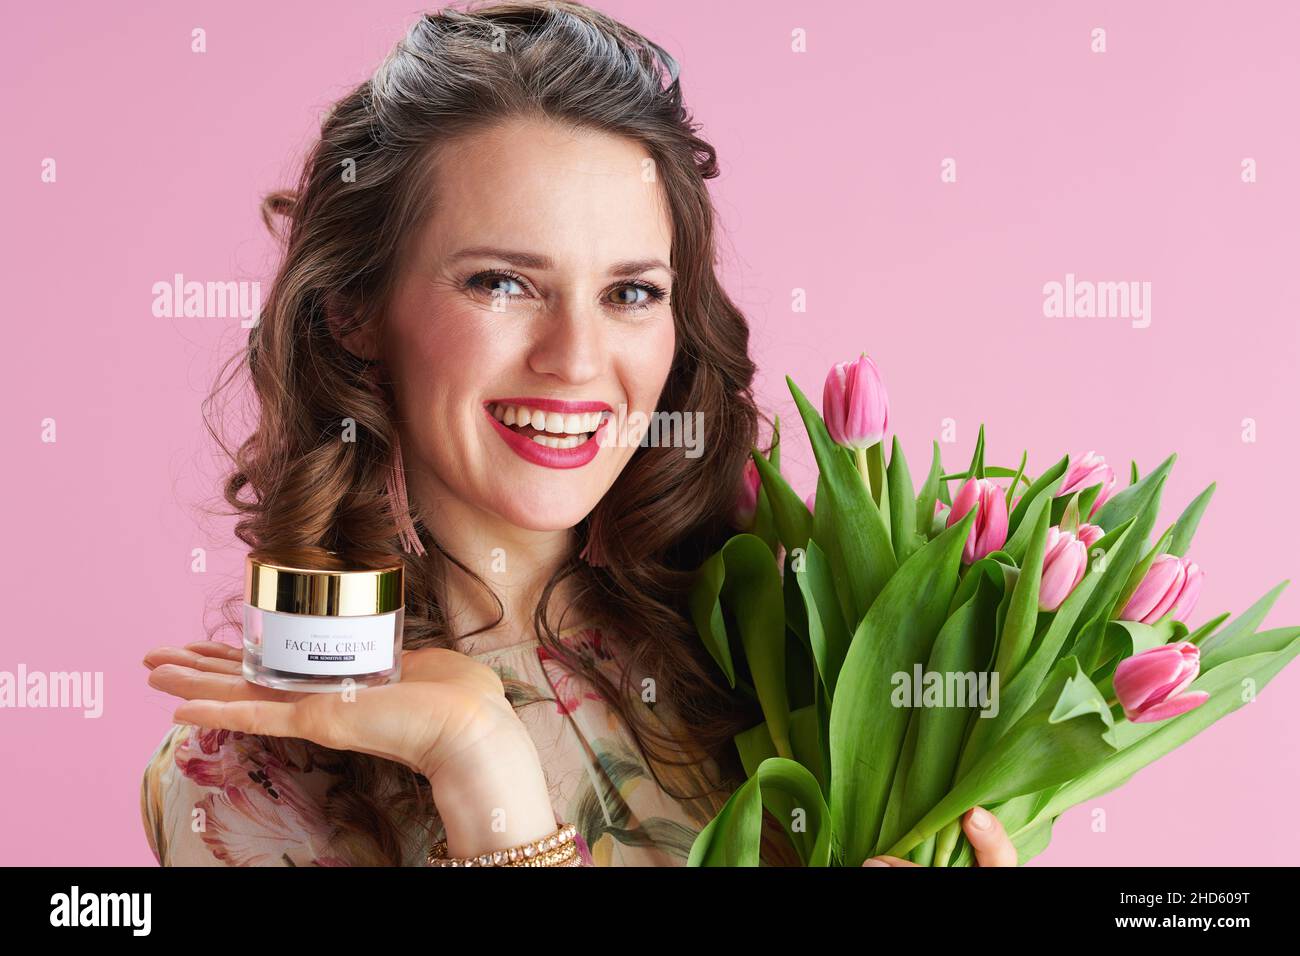 Portrait of smiling elegant female in floral dress with tulips bouquet and facial creme isolated on pink. Stock Photo